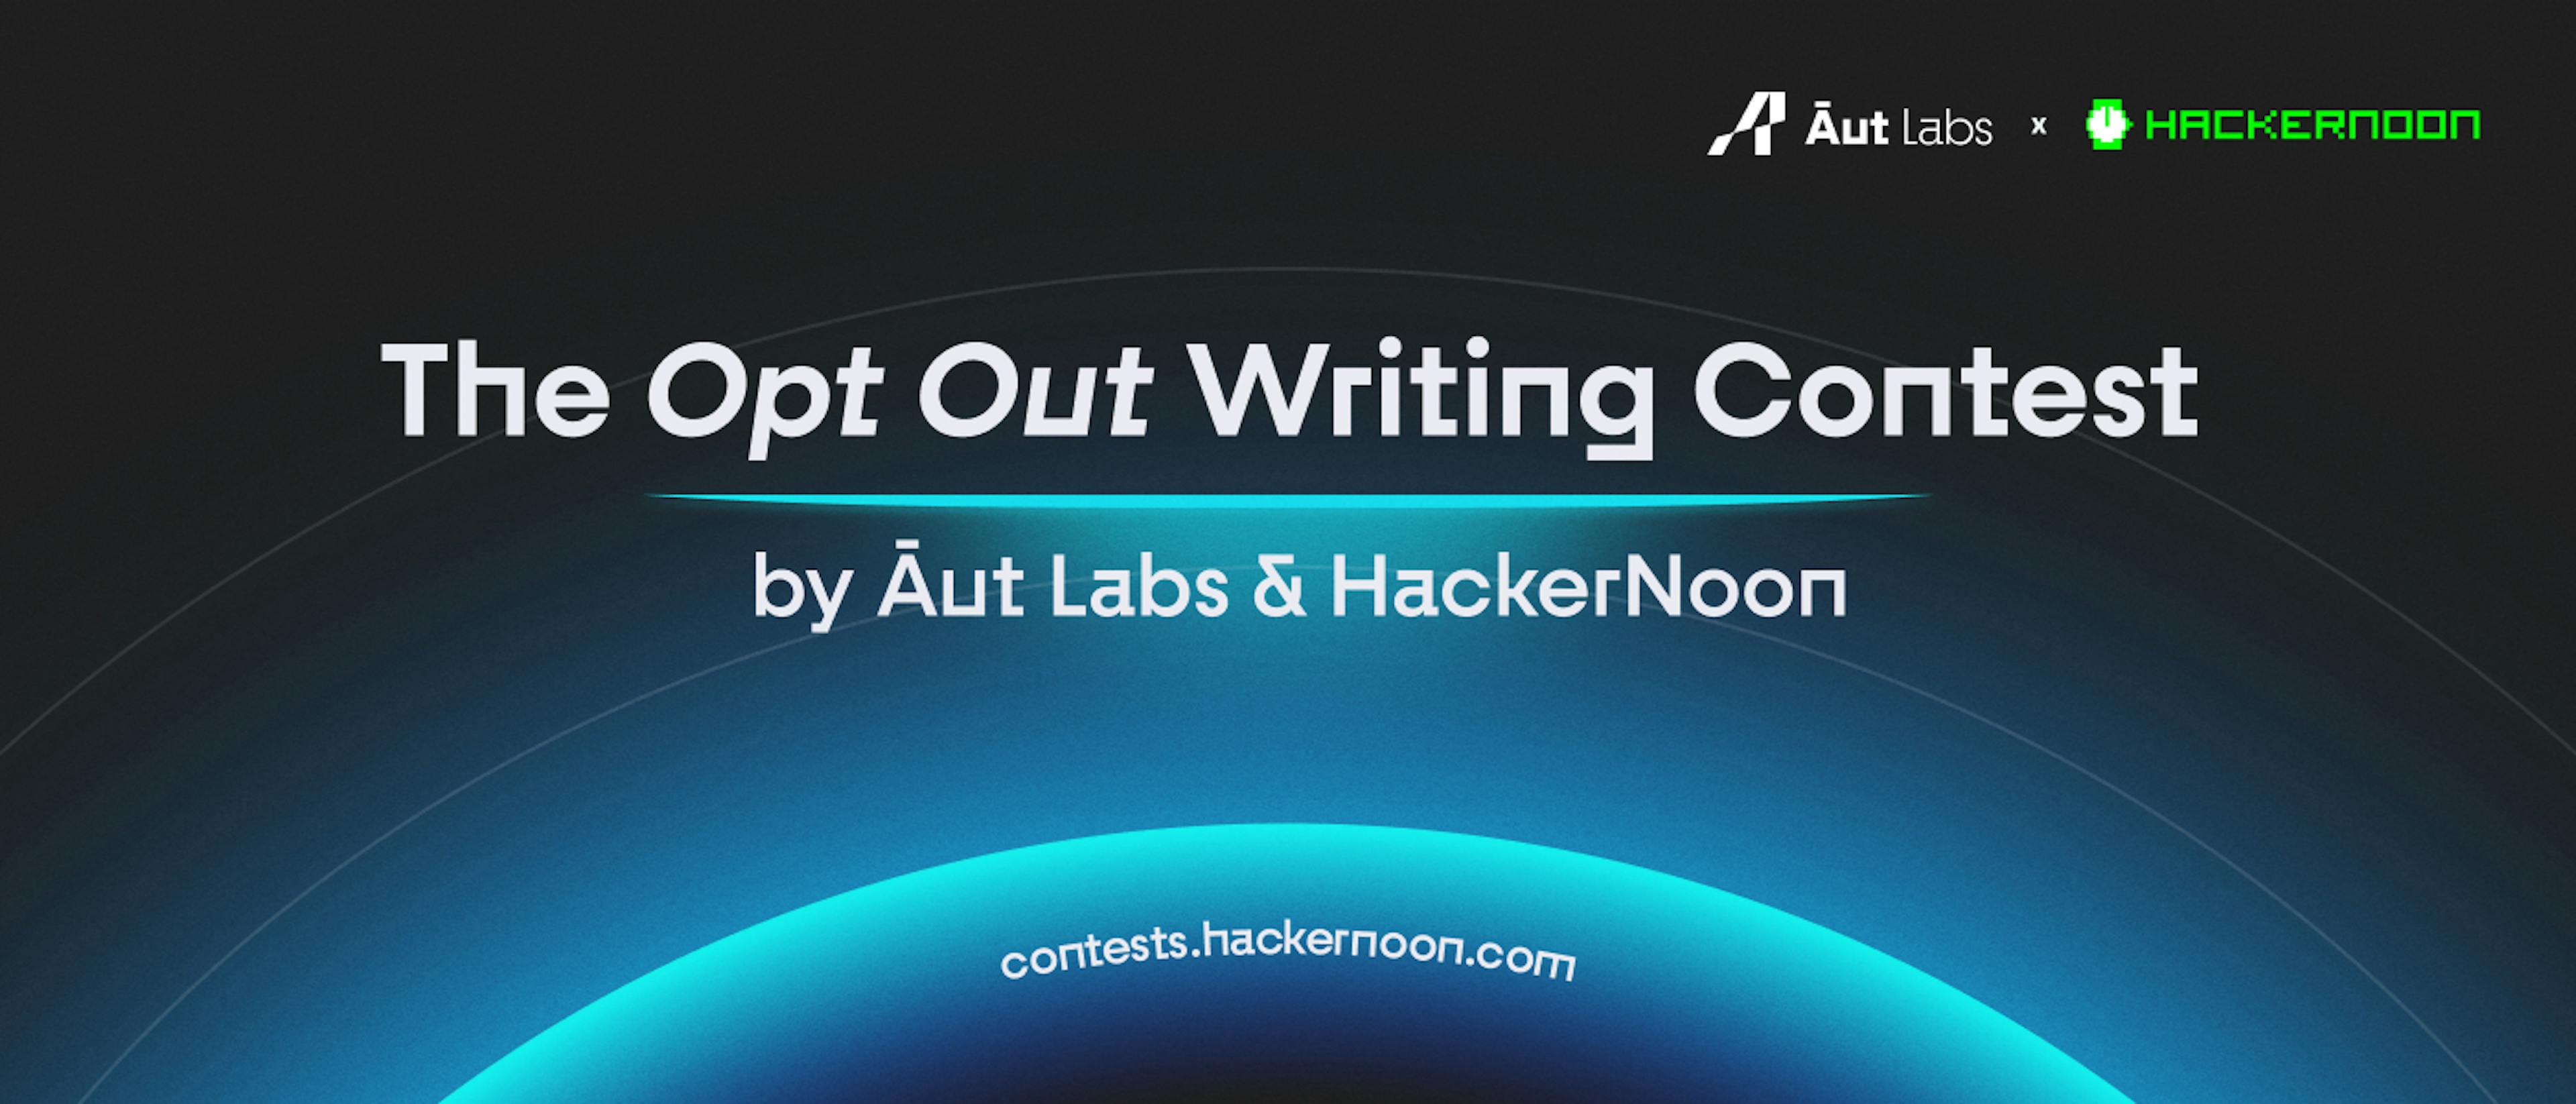 featured image - #OptOut: A Series of Writing Contests for Web3 Hacktivists by Āut Labs